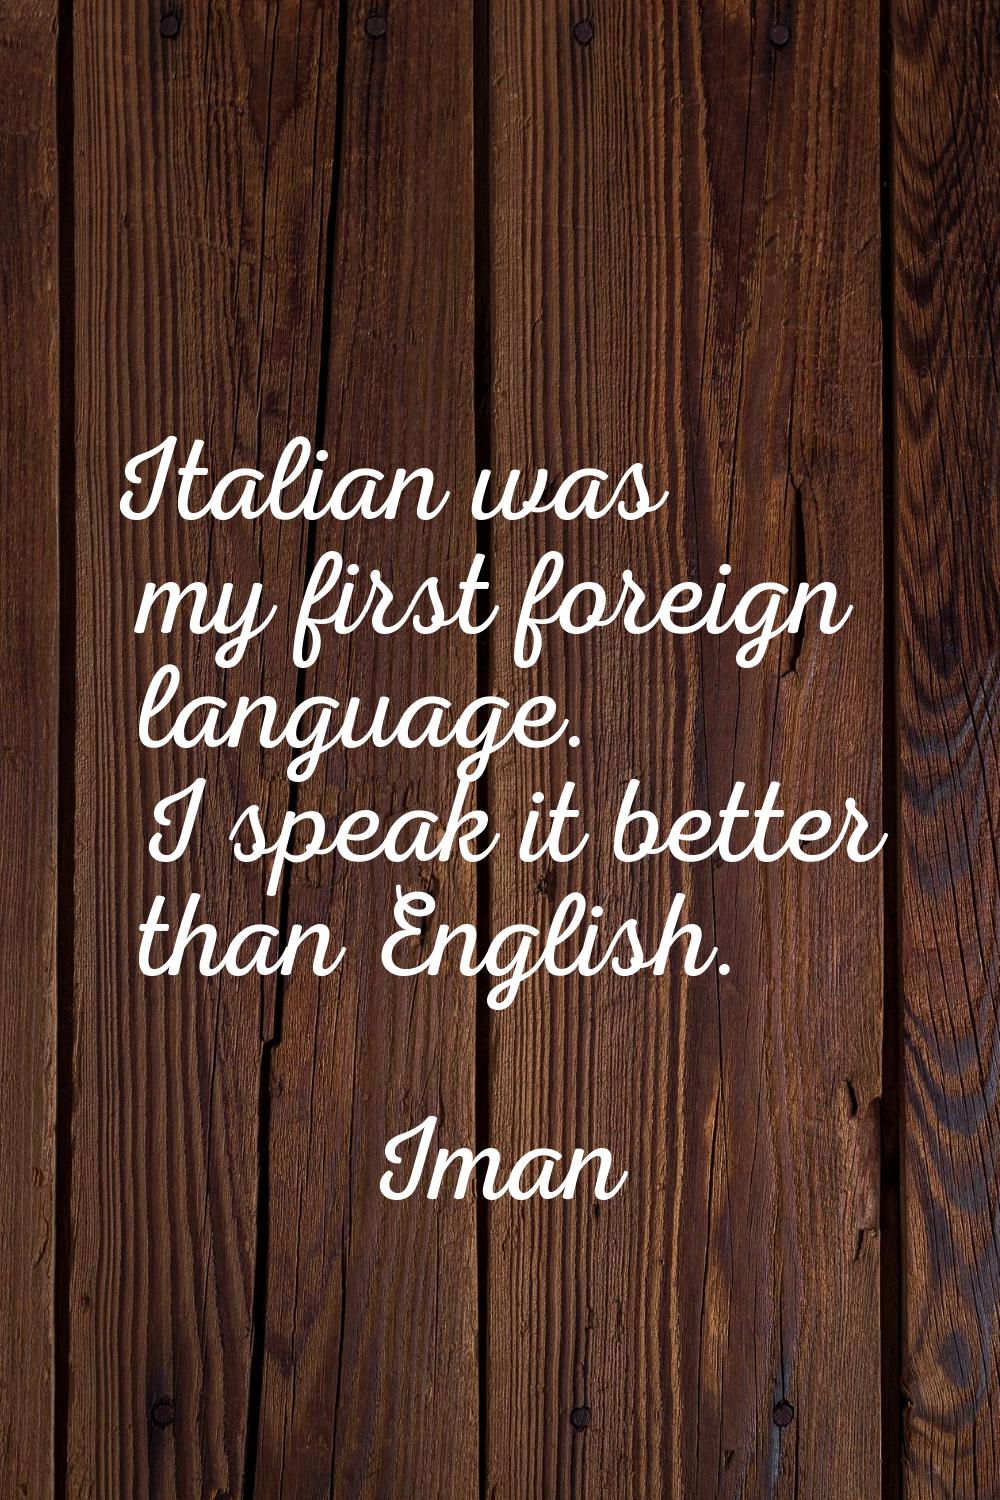 Italian was my first foreign language. I speak it better than English.